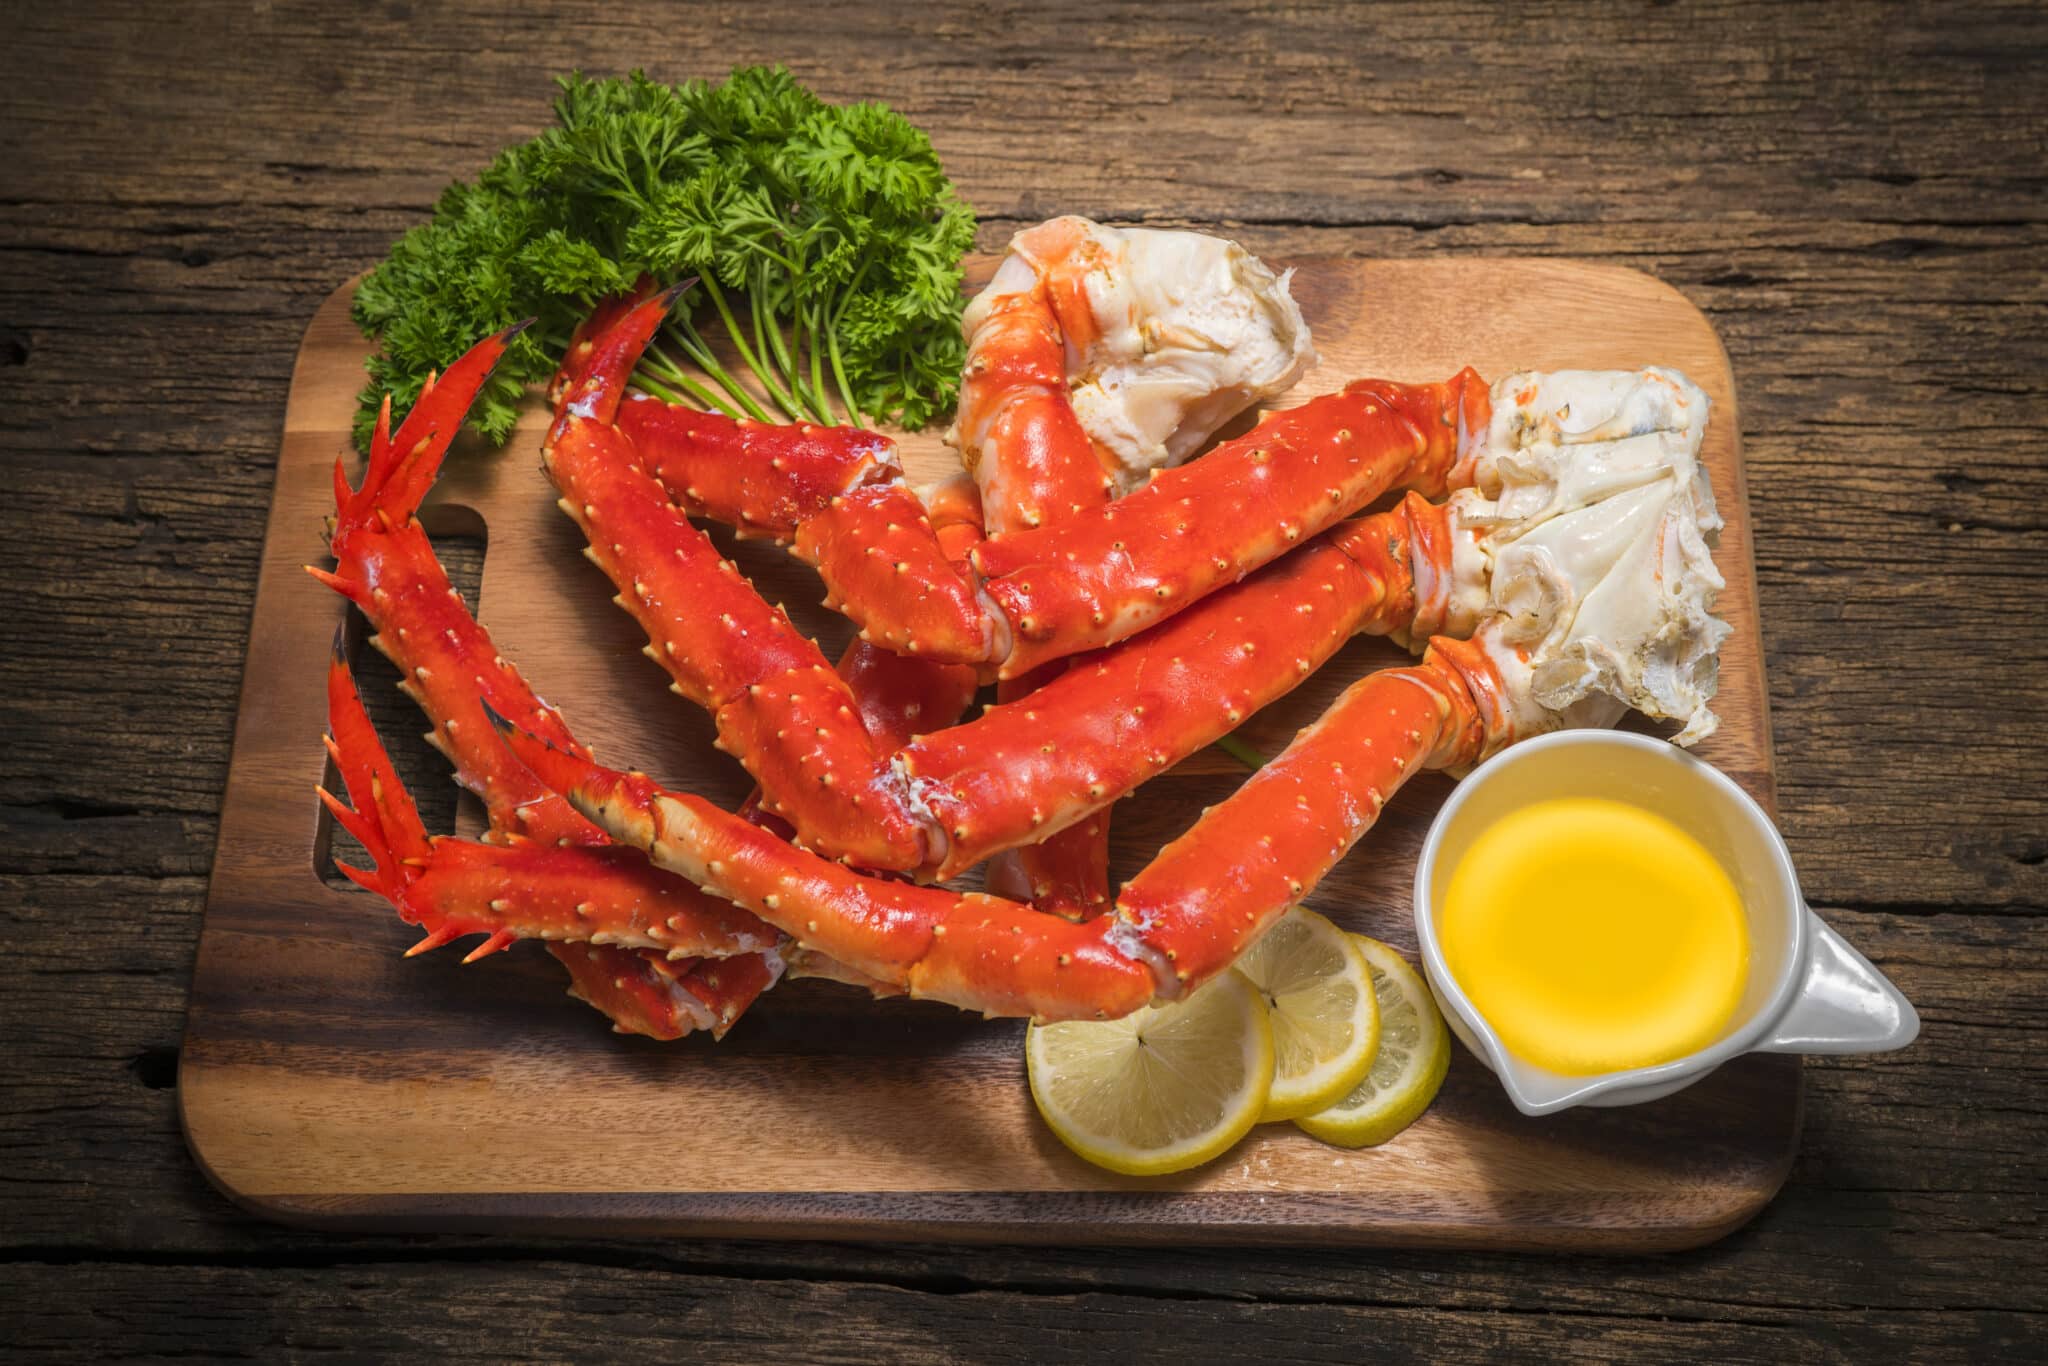 How To Cook Frozen Crab Legs in the Oven